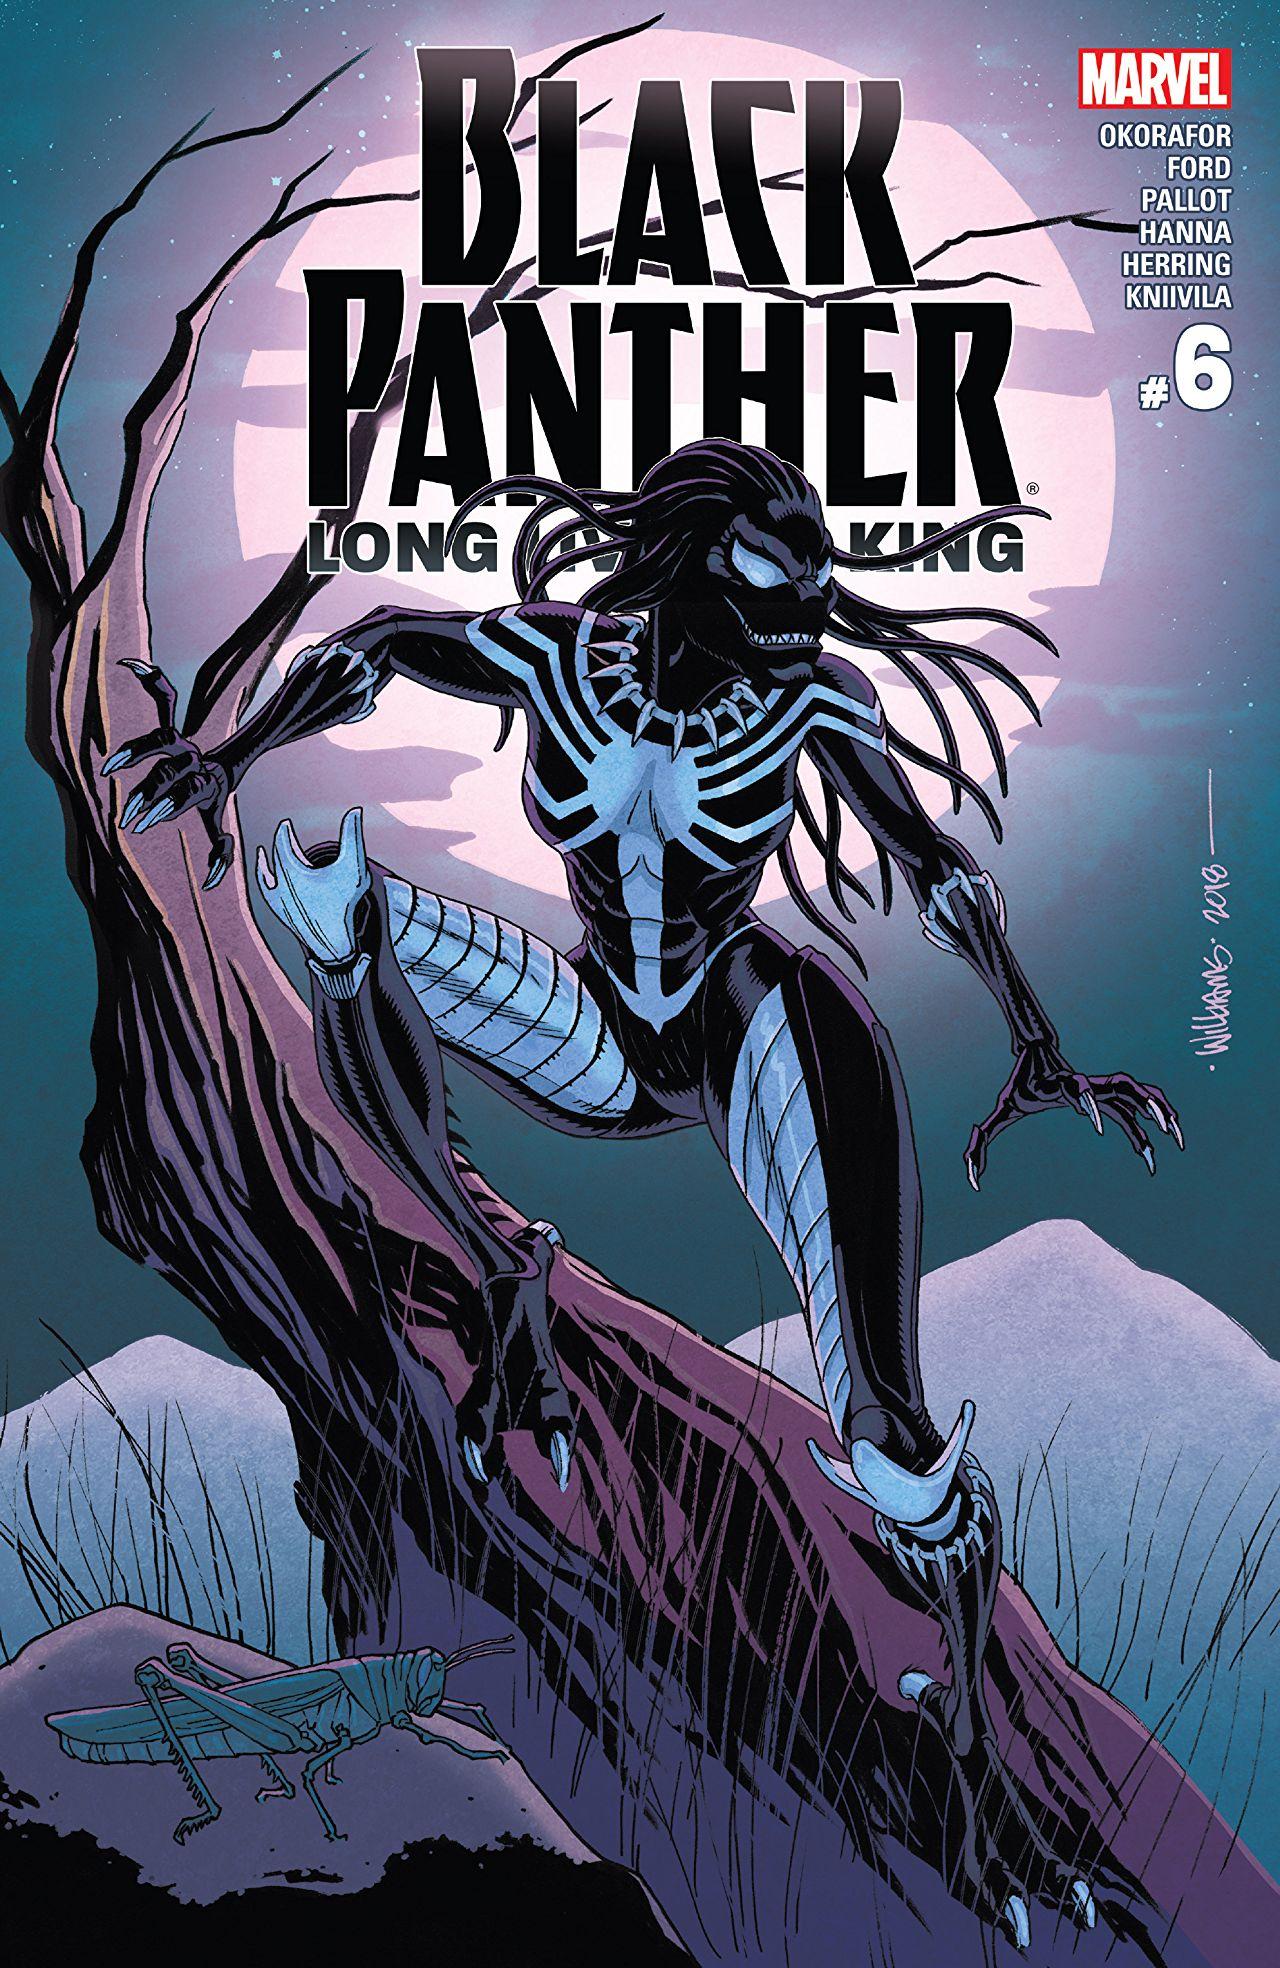 Black Panther: Long Live The King Vol. 1 #6